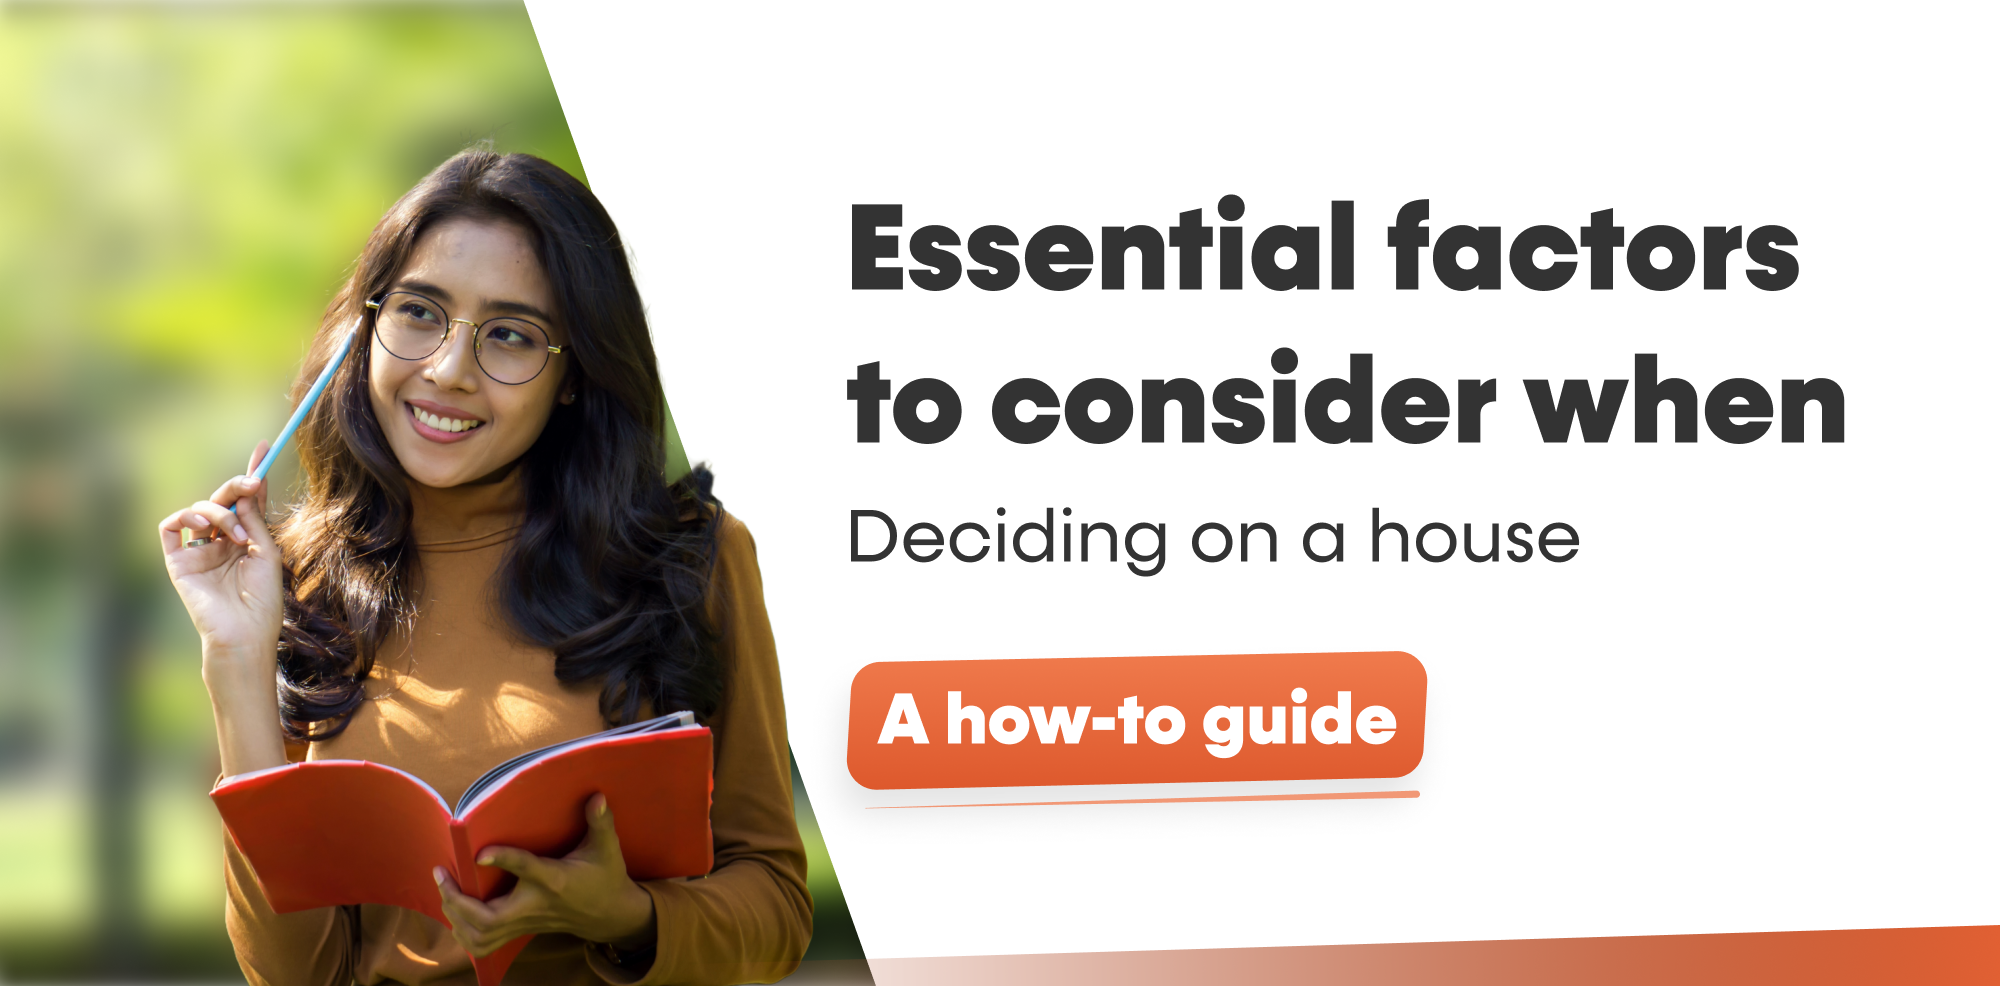 Essential factors to consider when deciding on a house: A how-to guide